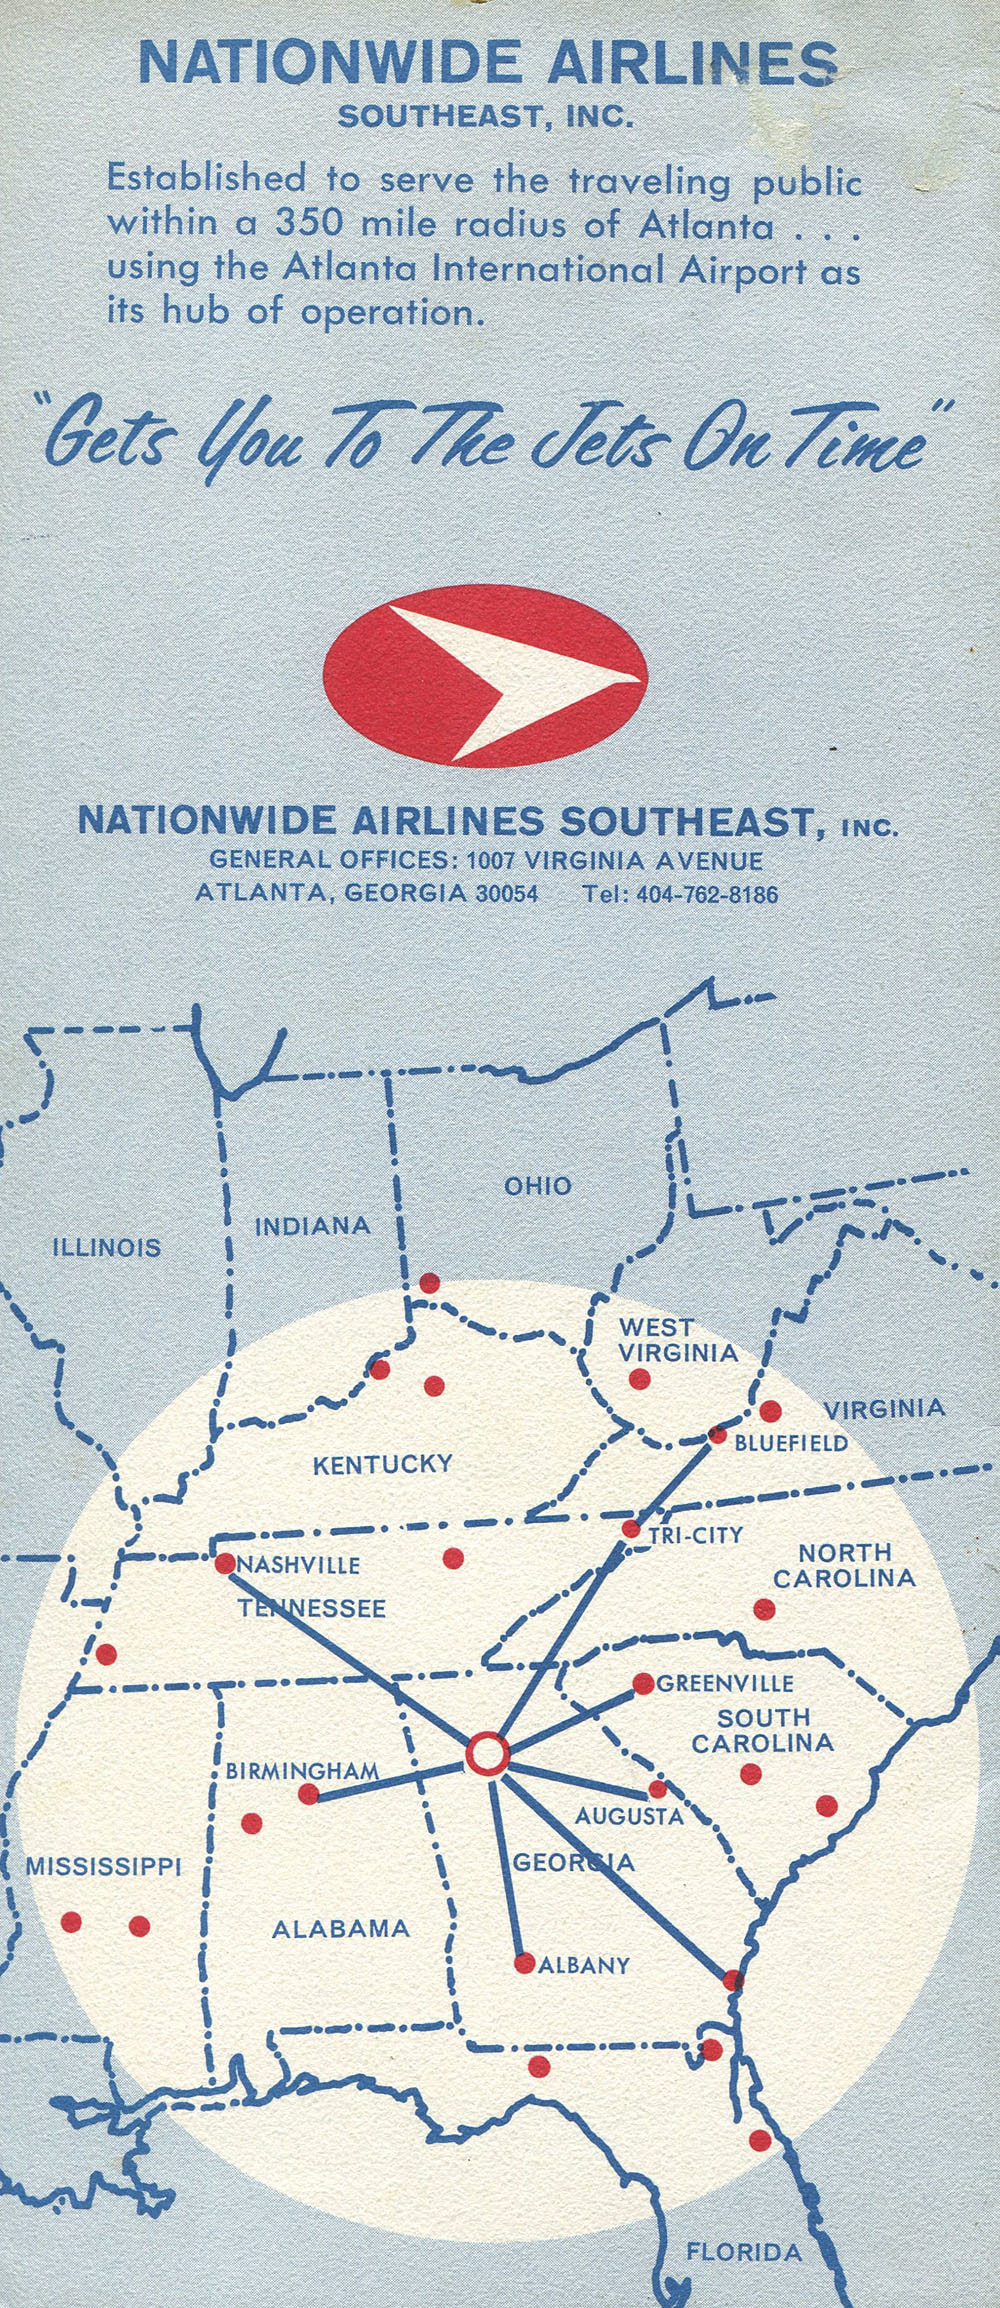 Nationwide Airlines Southeast route map